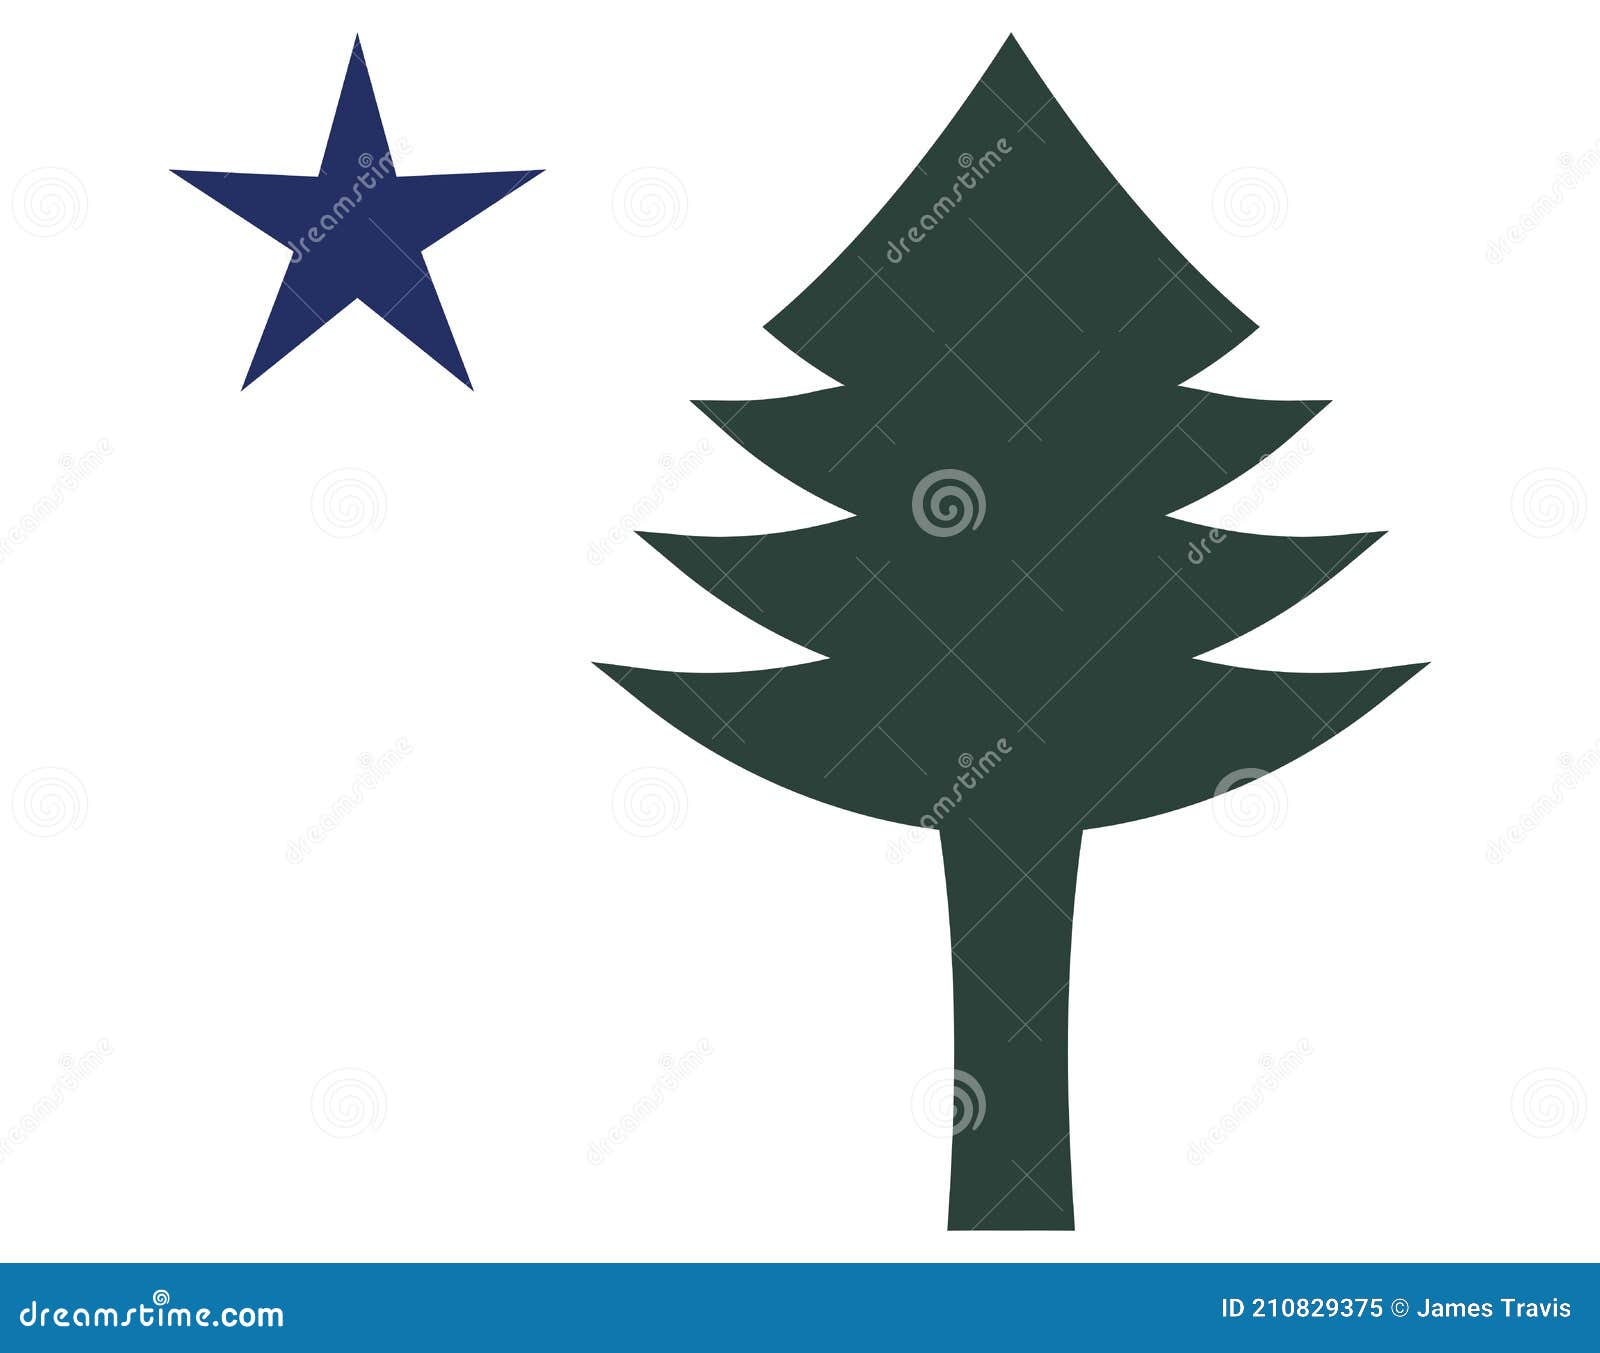 Top 93+ Images maine flag with pine tree and star Full HD, 2k, 4k